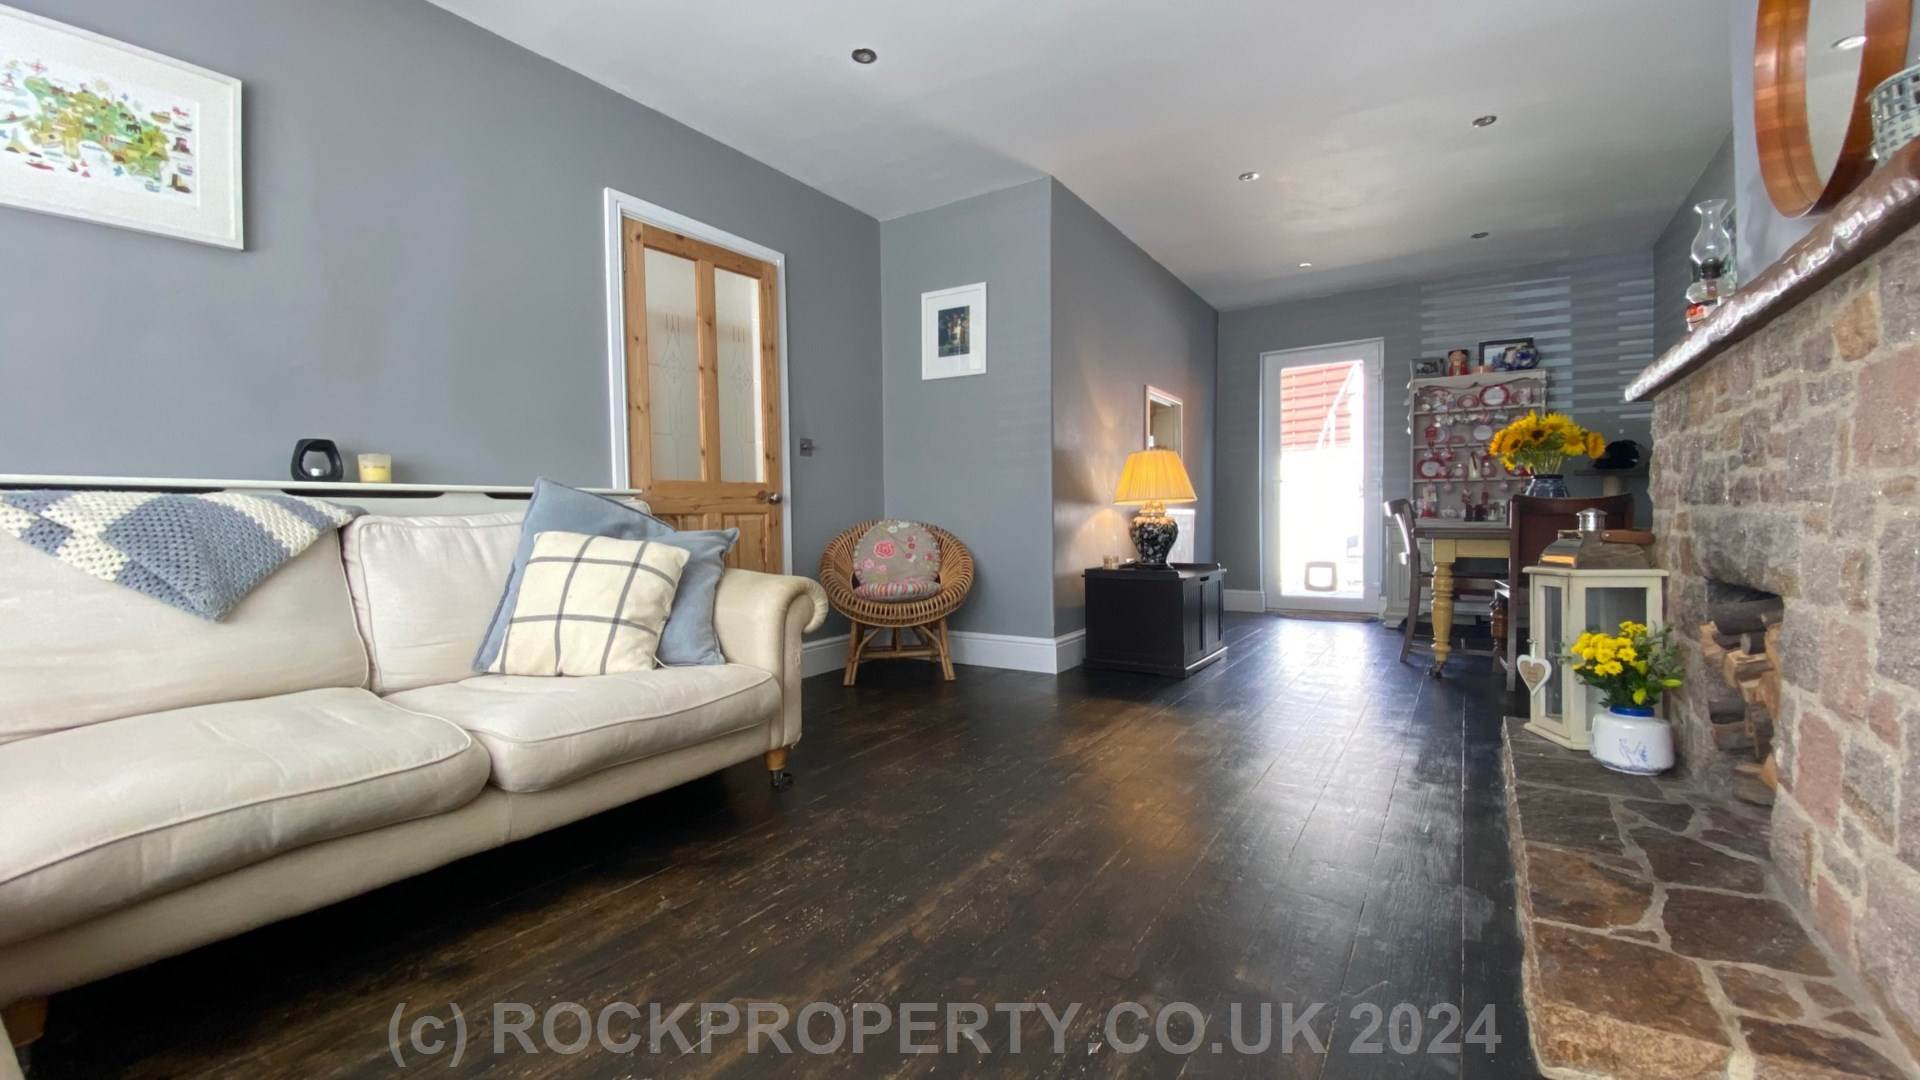 MODERN 3 BED FAMILY HOME, Langley Park, St Saviour, Image 9